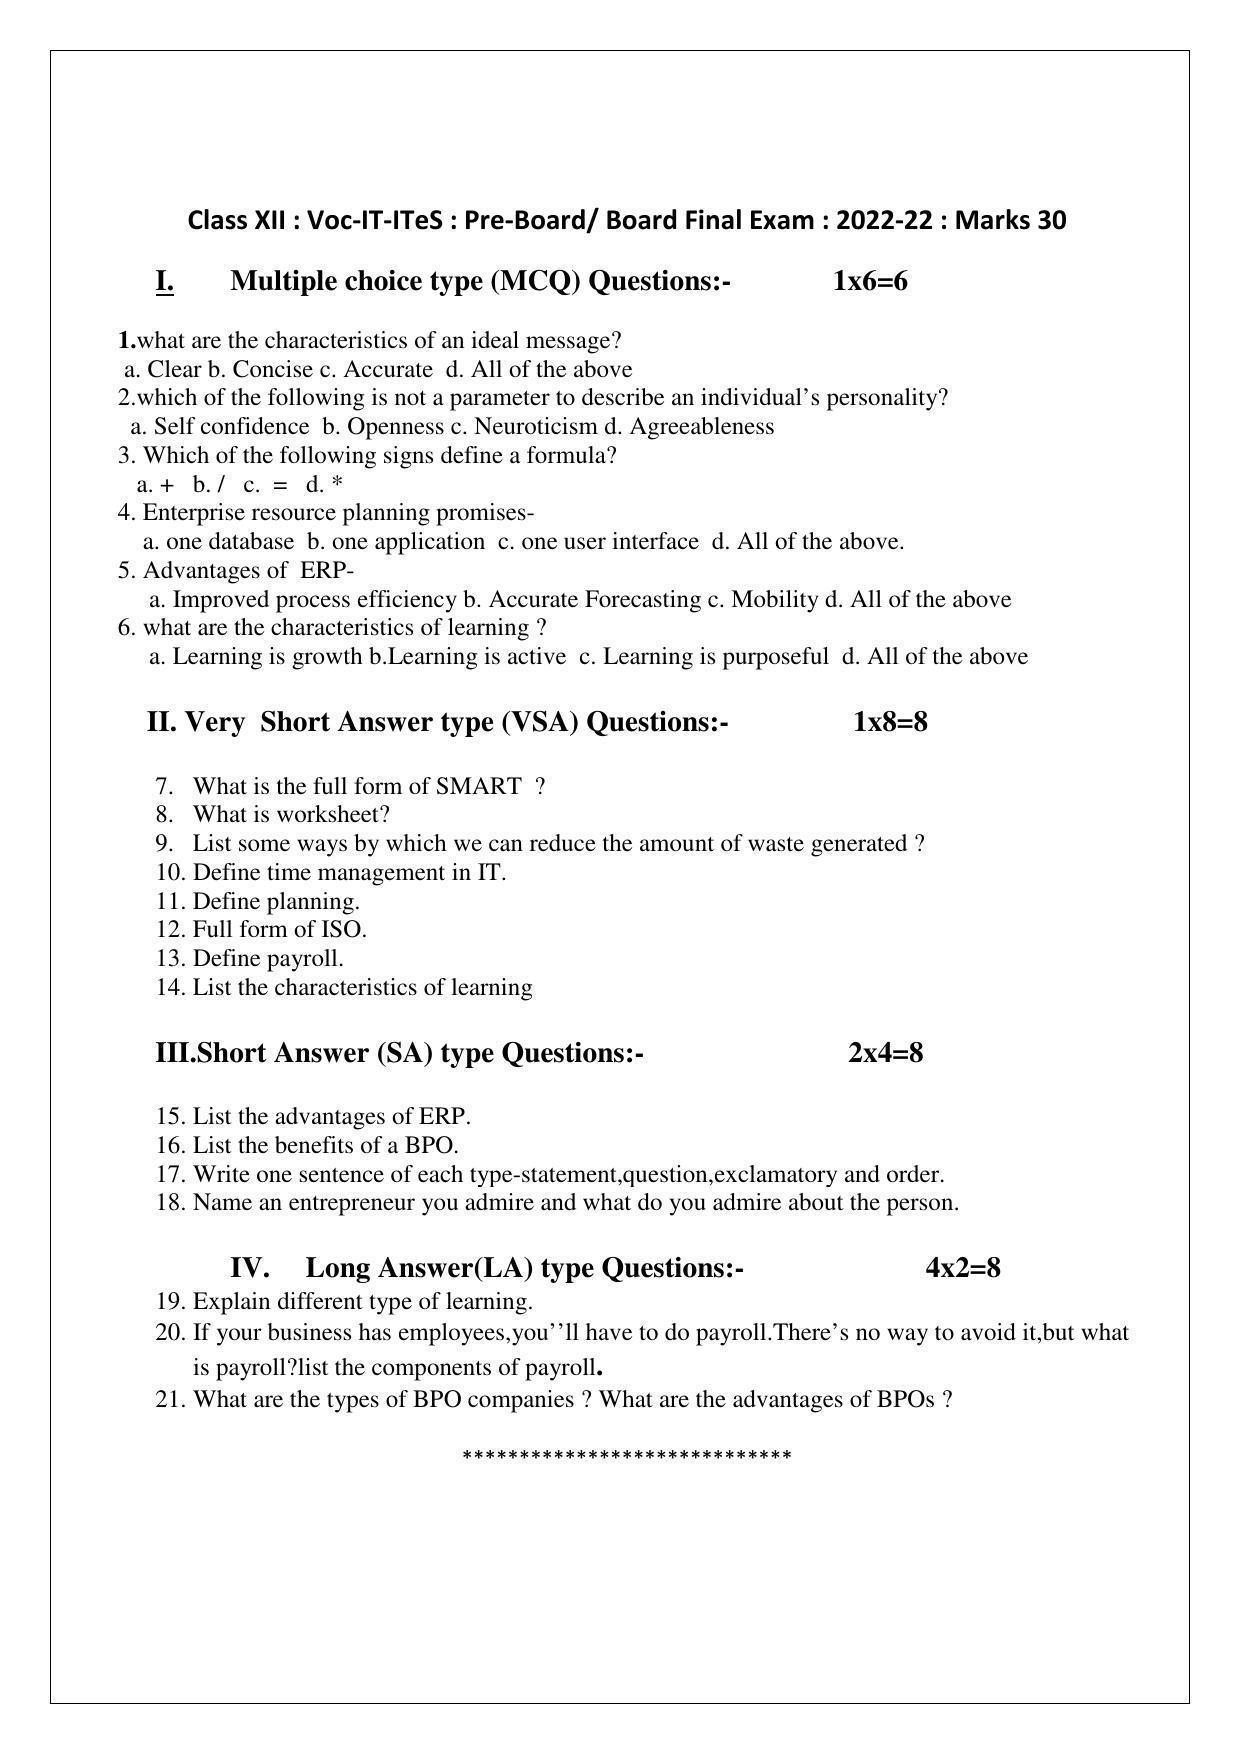 Tripura Board Class 12th Vocational (Theo & Prac) Model Question Paper 2023 - Page 7